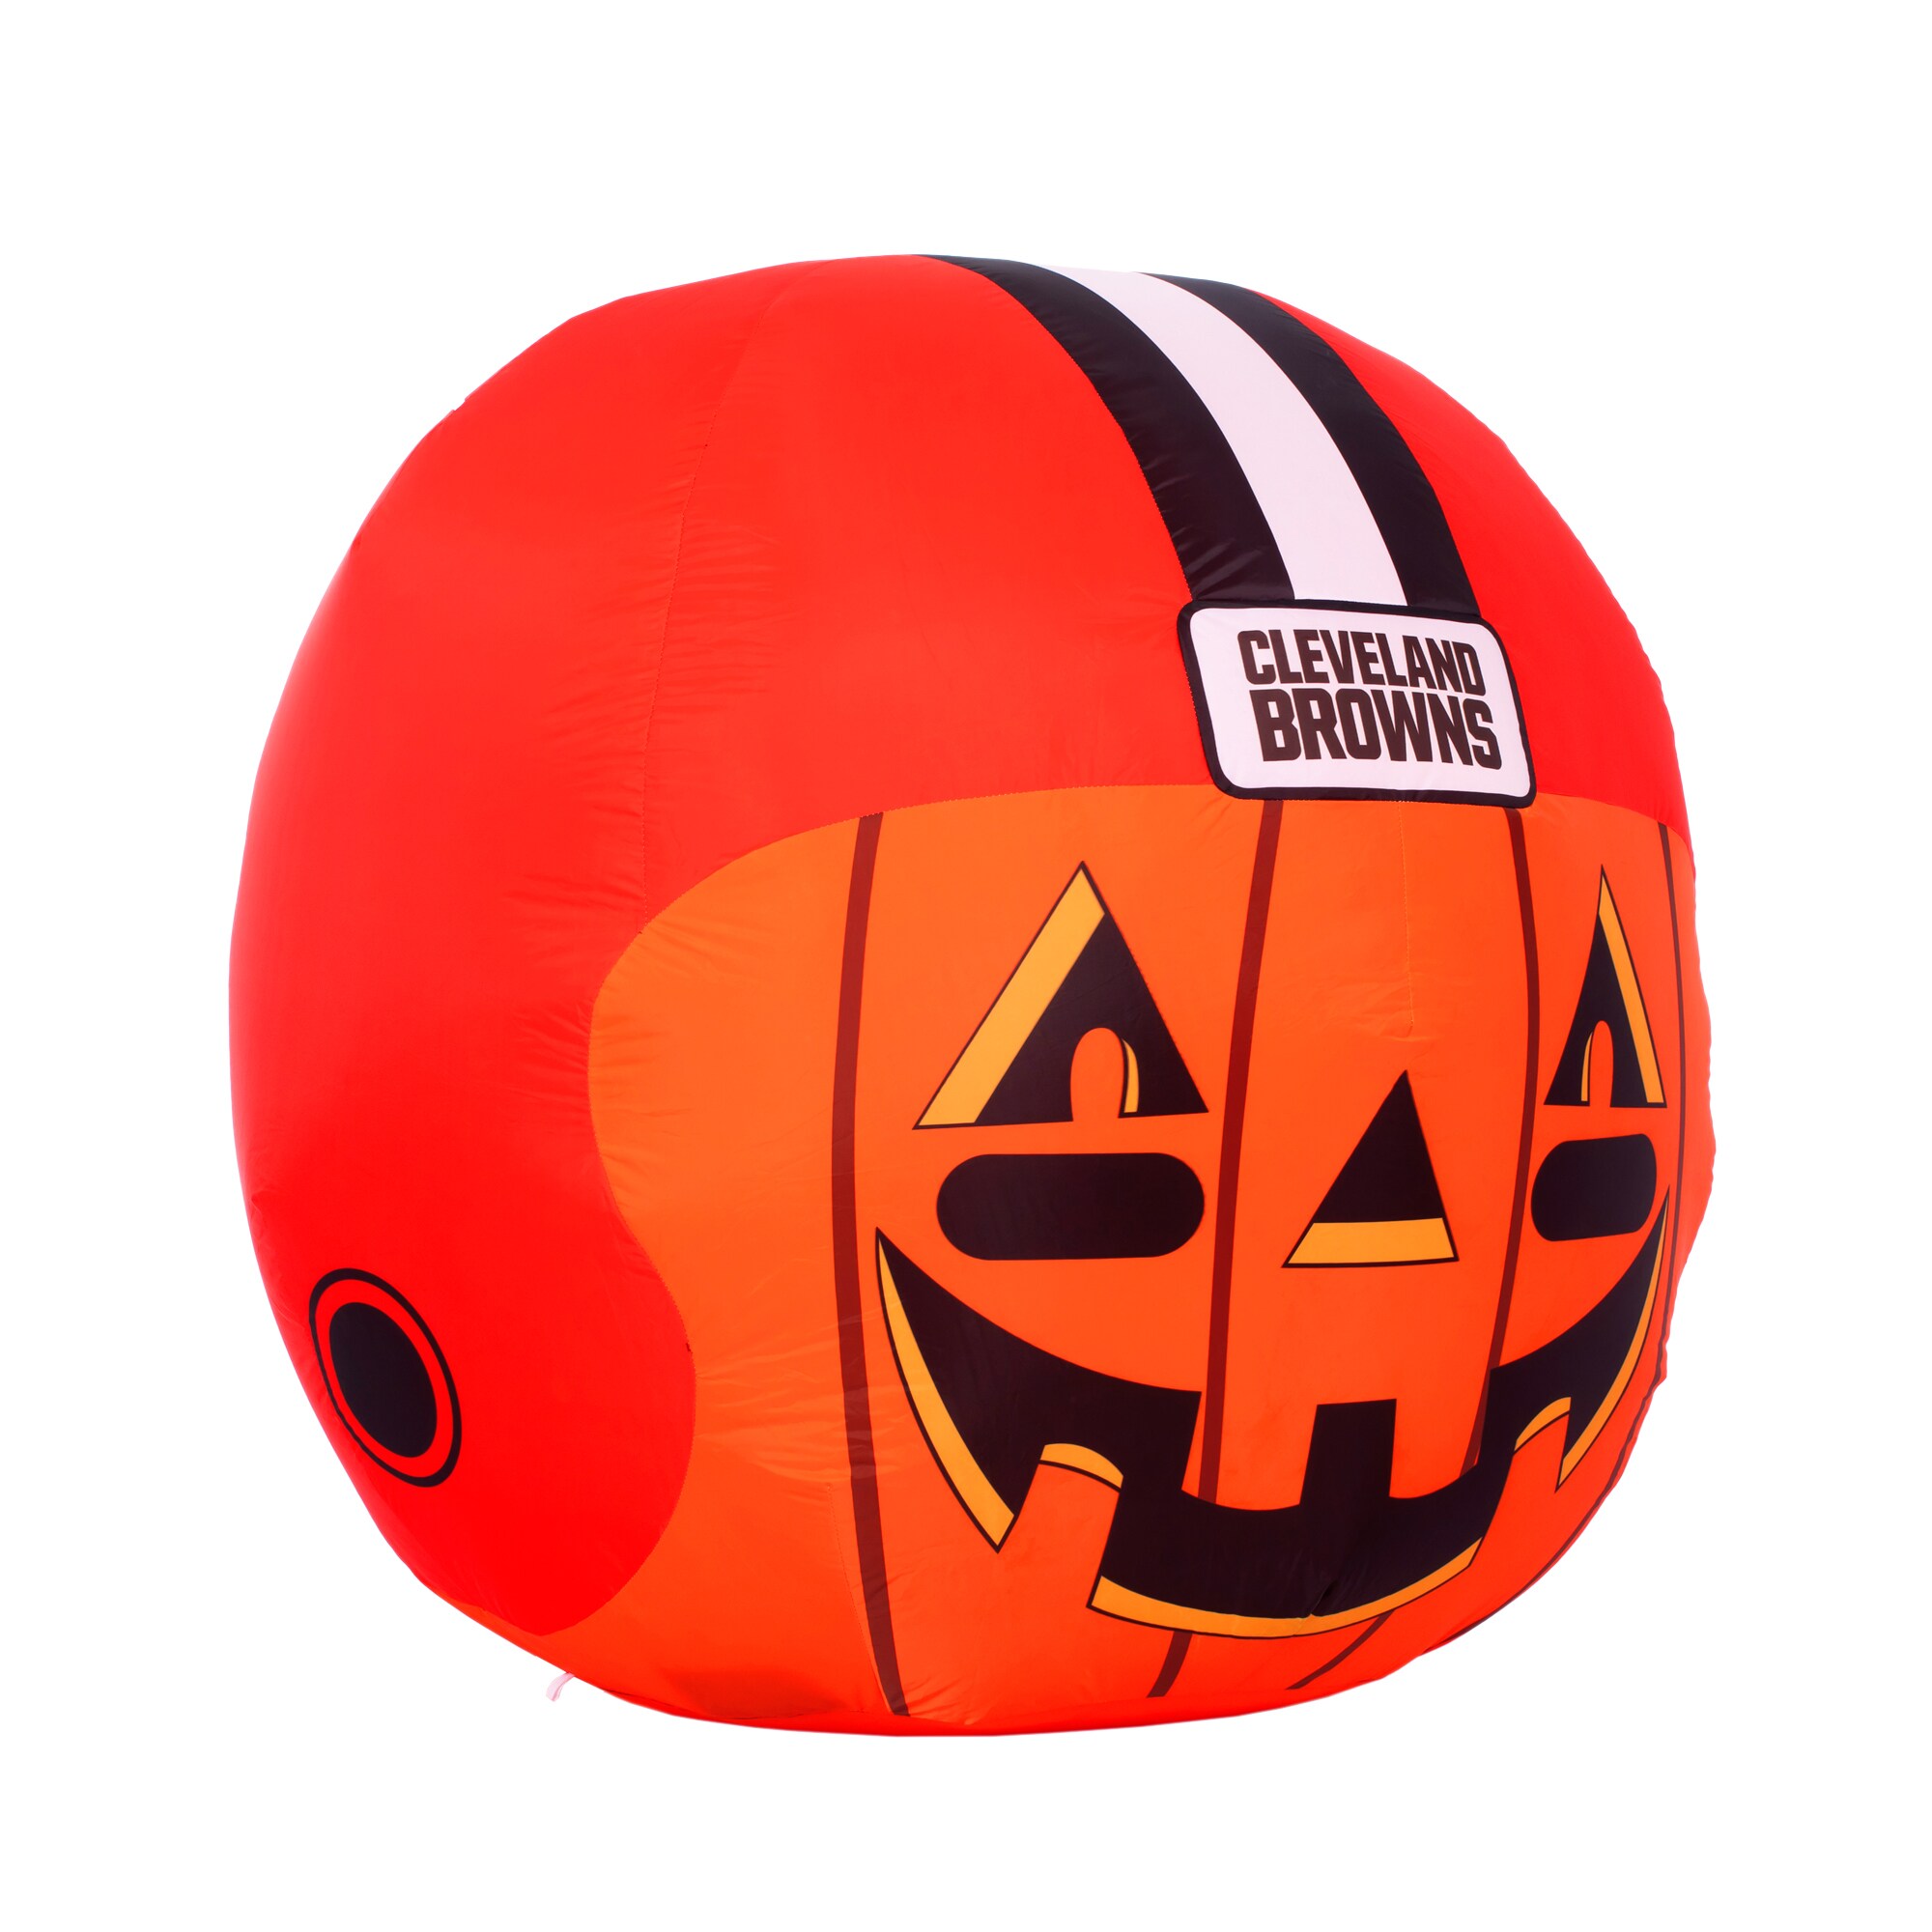 Cleveland Browns Halloween Decorations at